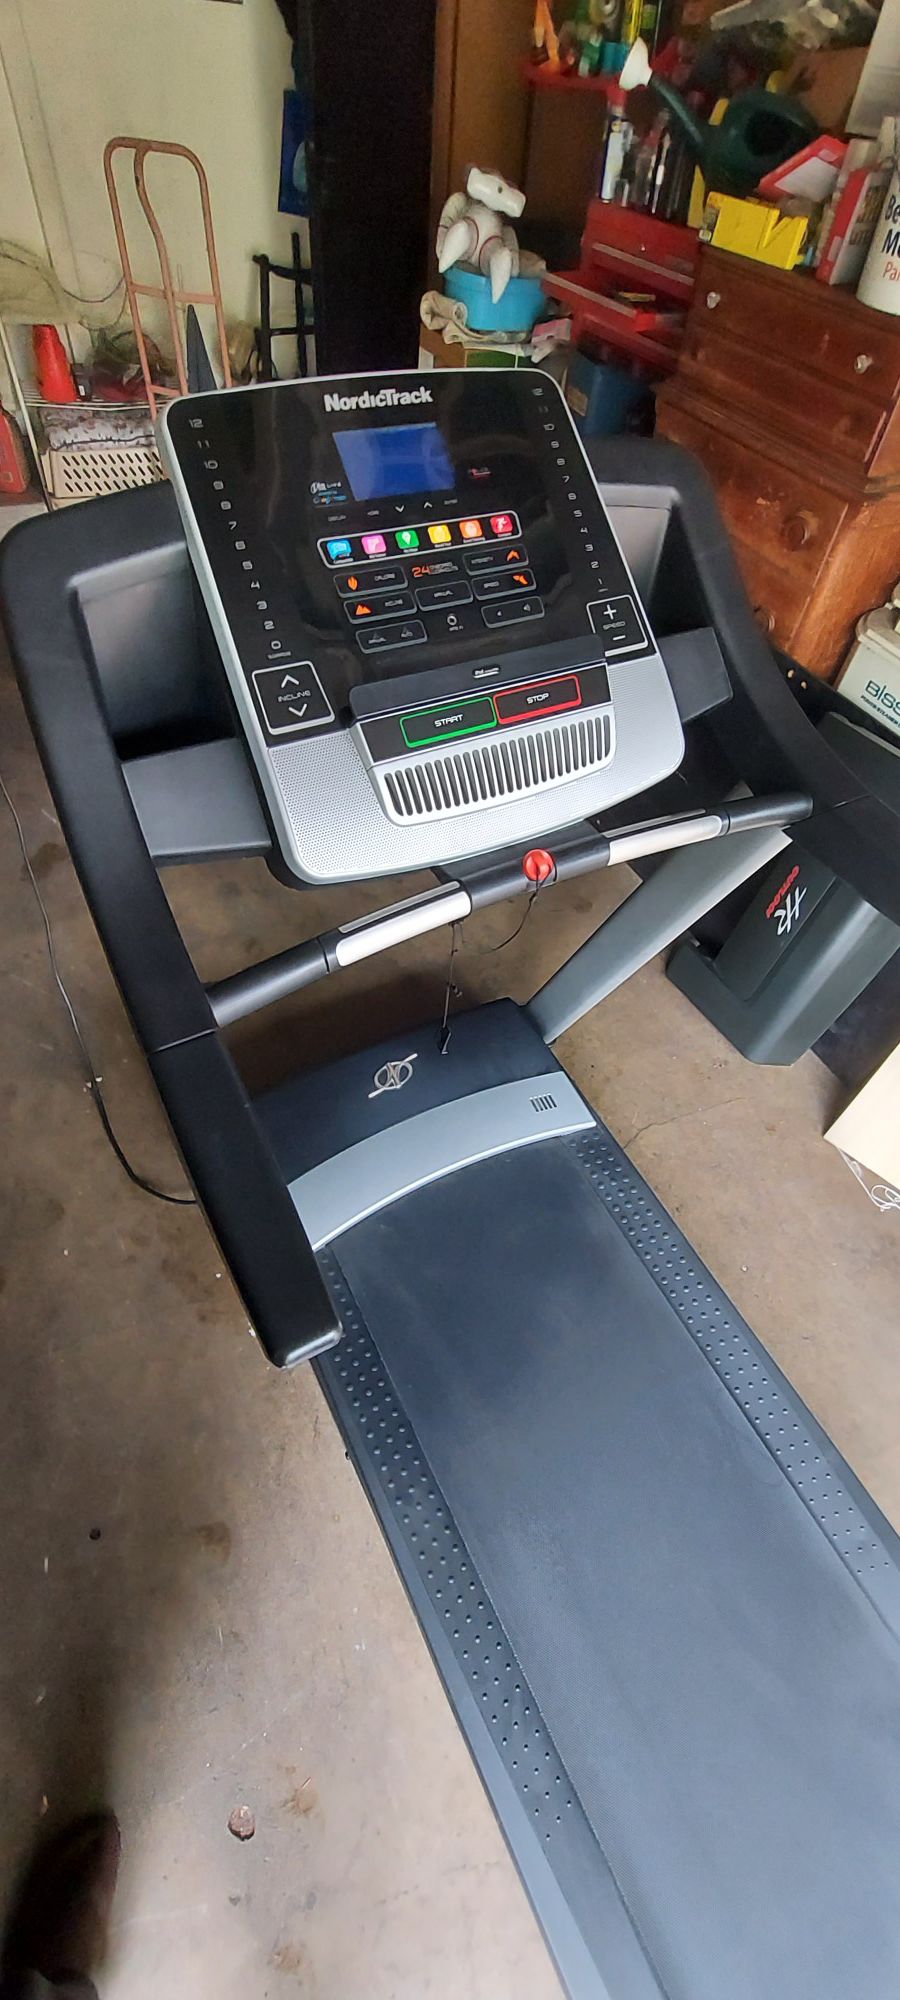 FREE DELIVERY!!! Nordictrack Dualflex Cushioning Foldable Treadmill with Audio Speakers and FREE Smart Watch